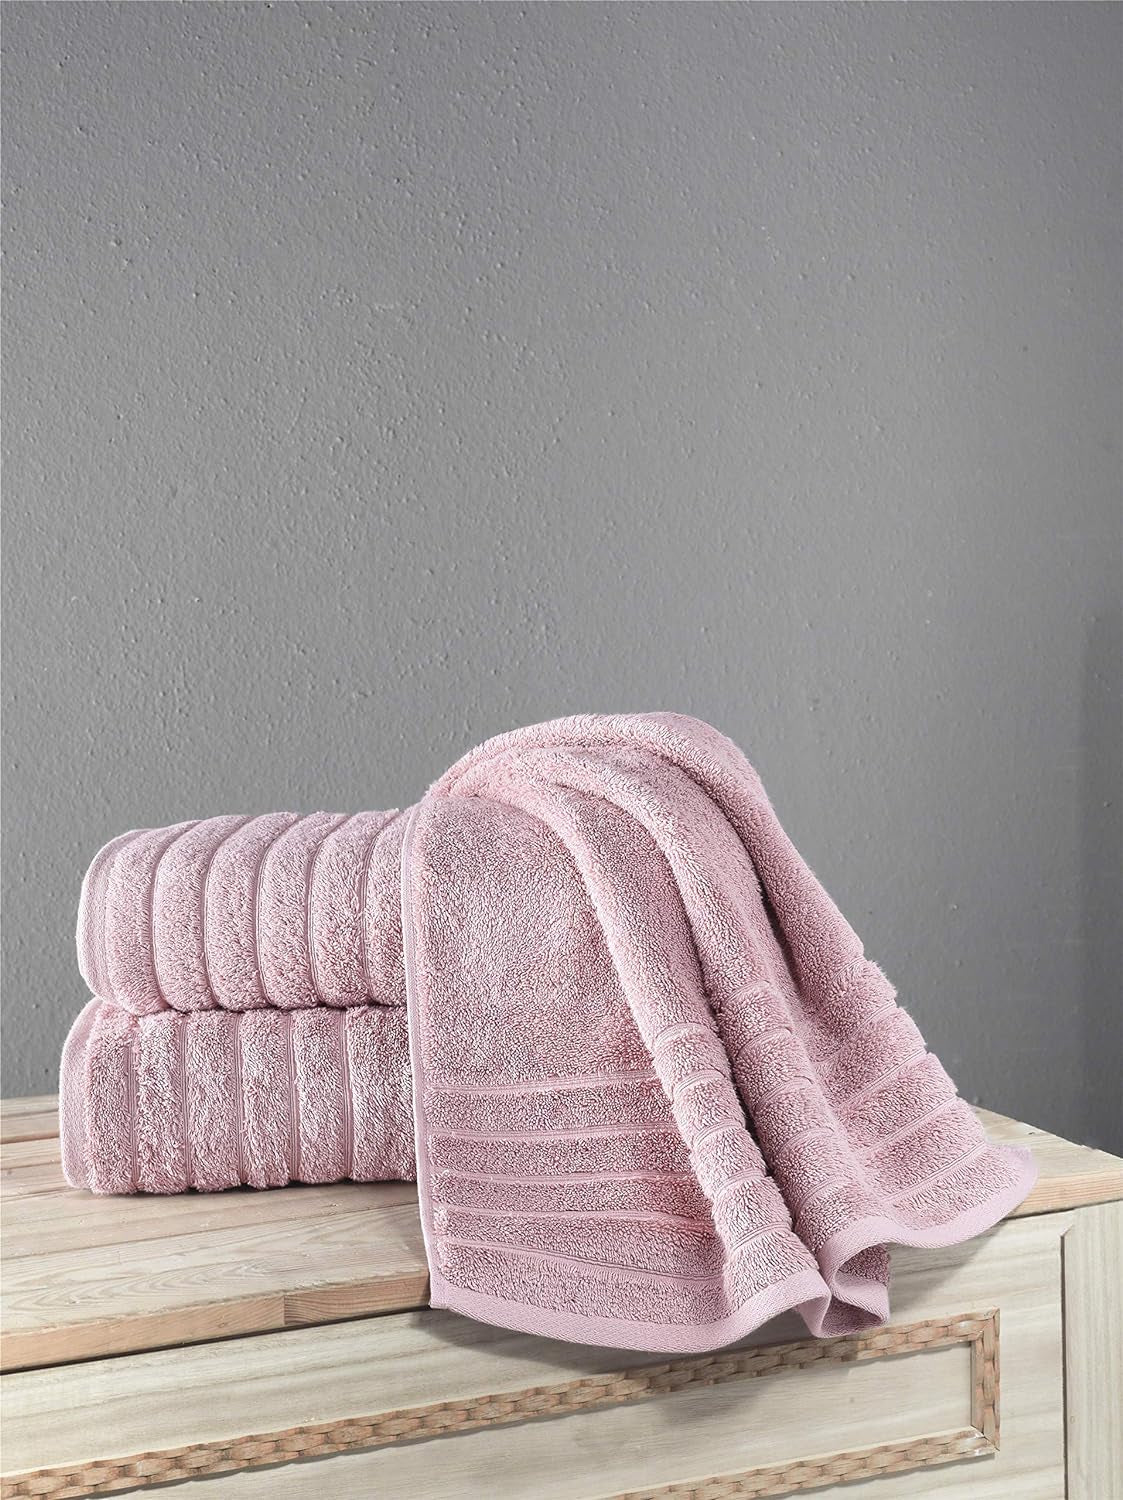 Barnum - Turkish Bath Towels Set of 3 - Premium Quality Made with 100% Turkish Cotton, Spa & Hotel Towels, Absorbent & Comfy Bath Towels | 30"X56" (Rose)